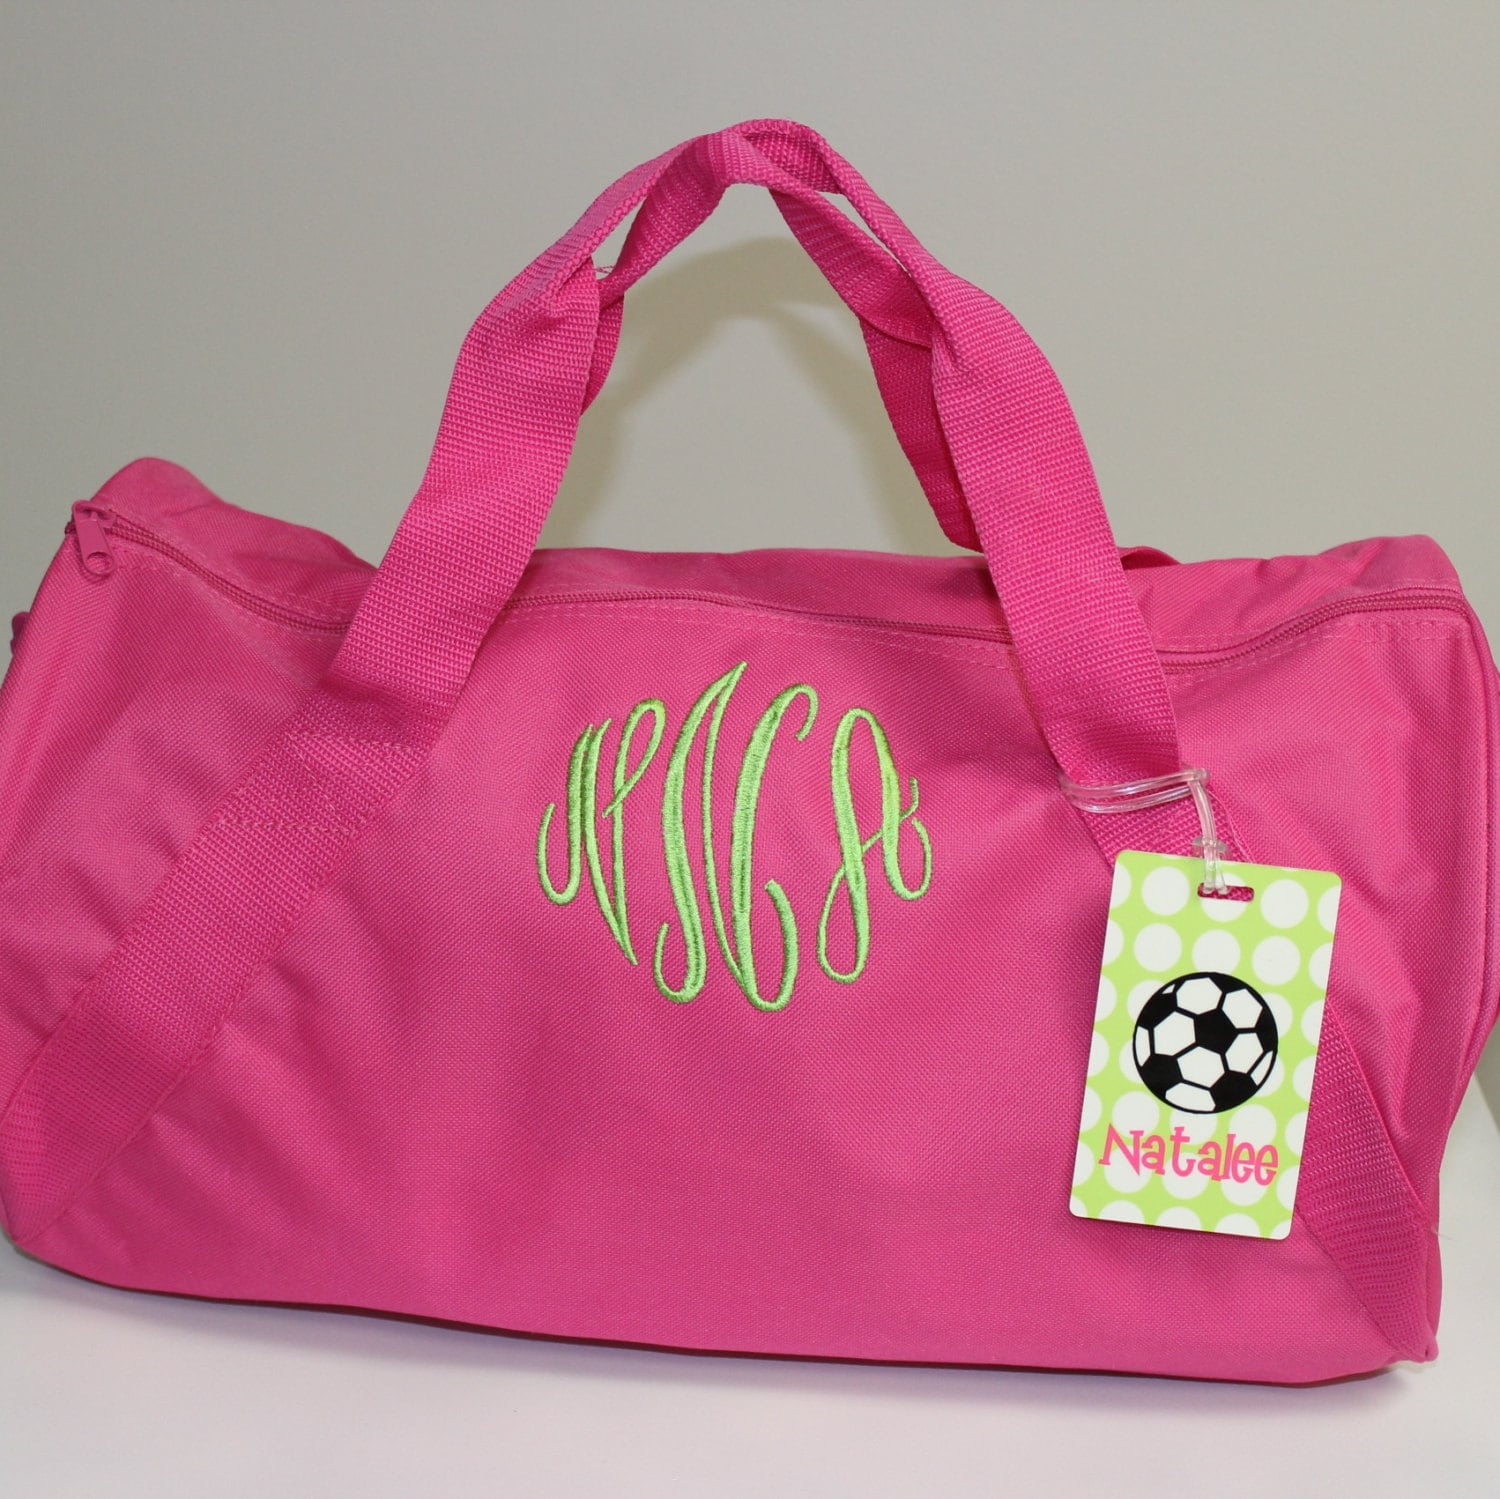 Monogrammed Overnight Bag Pink Duffle Bag Personalized Bag